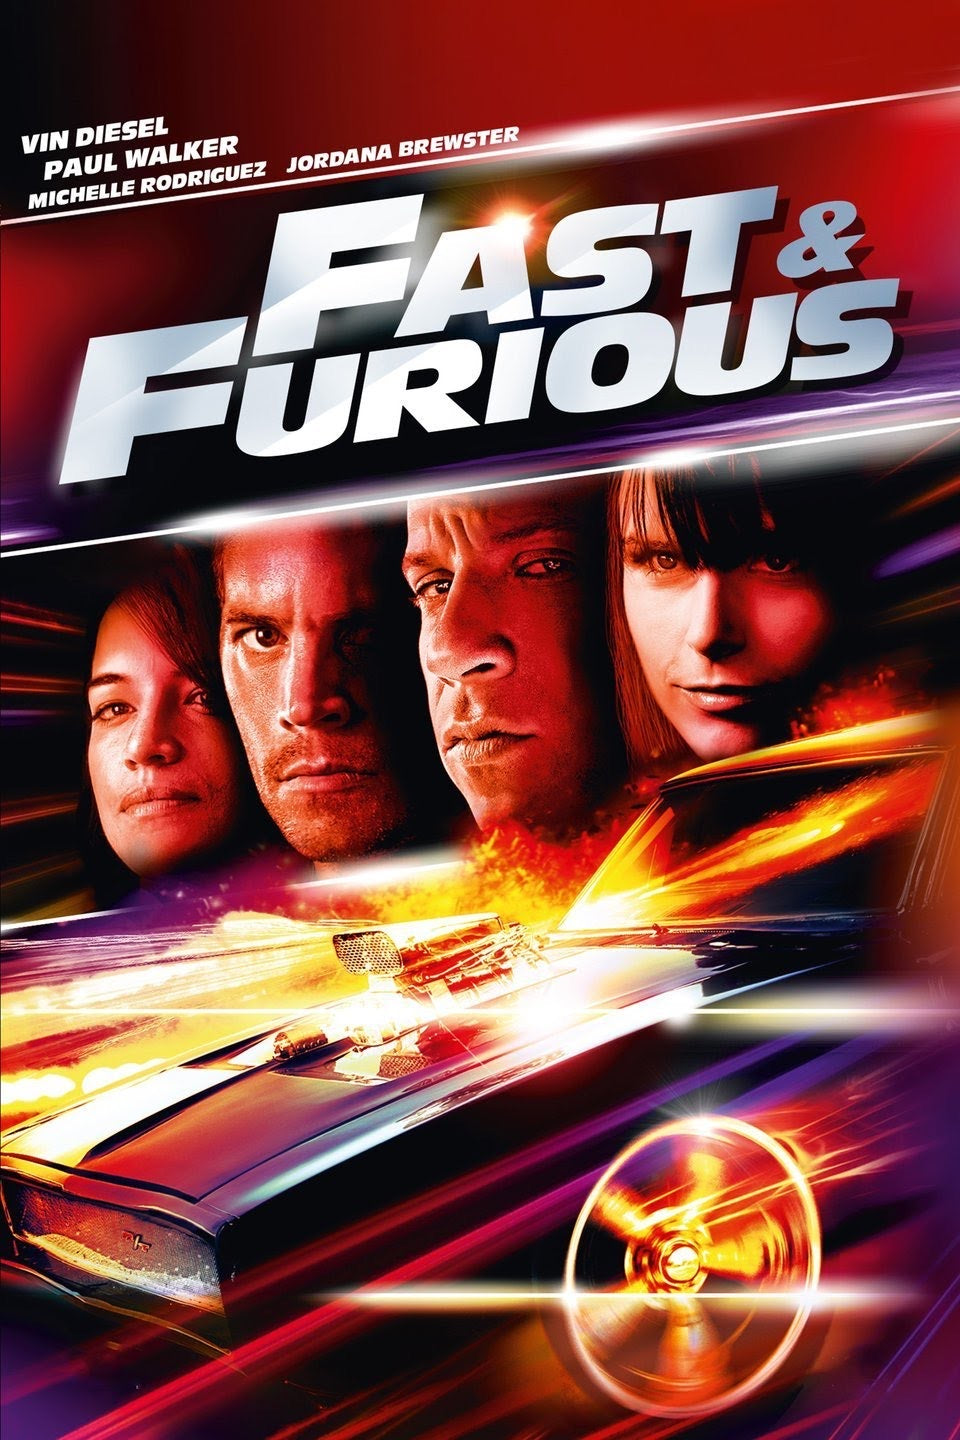 Fast & Furious (2009) Vudu or Movies Anywhere HD redemption only